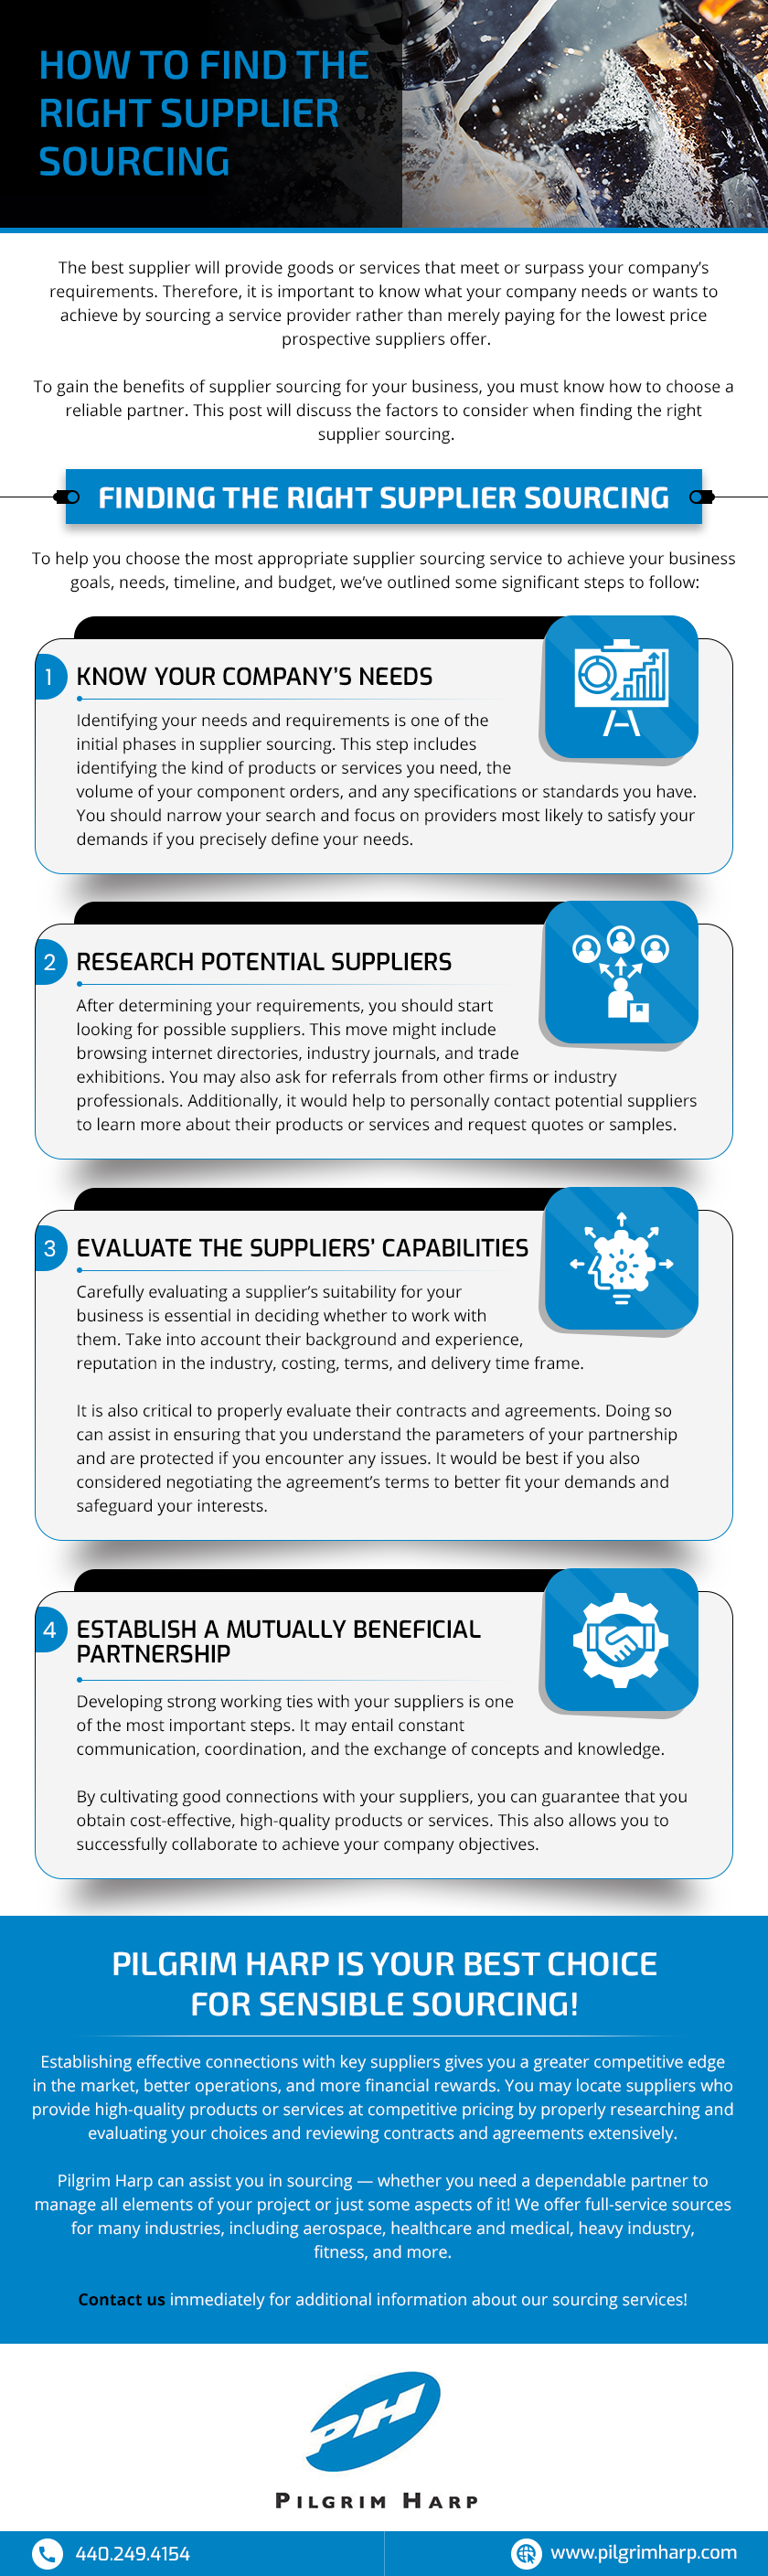 How-To-Find-the-Right-Supplier-Sourcing